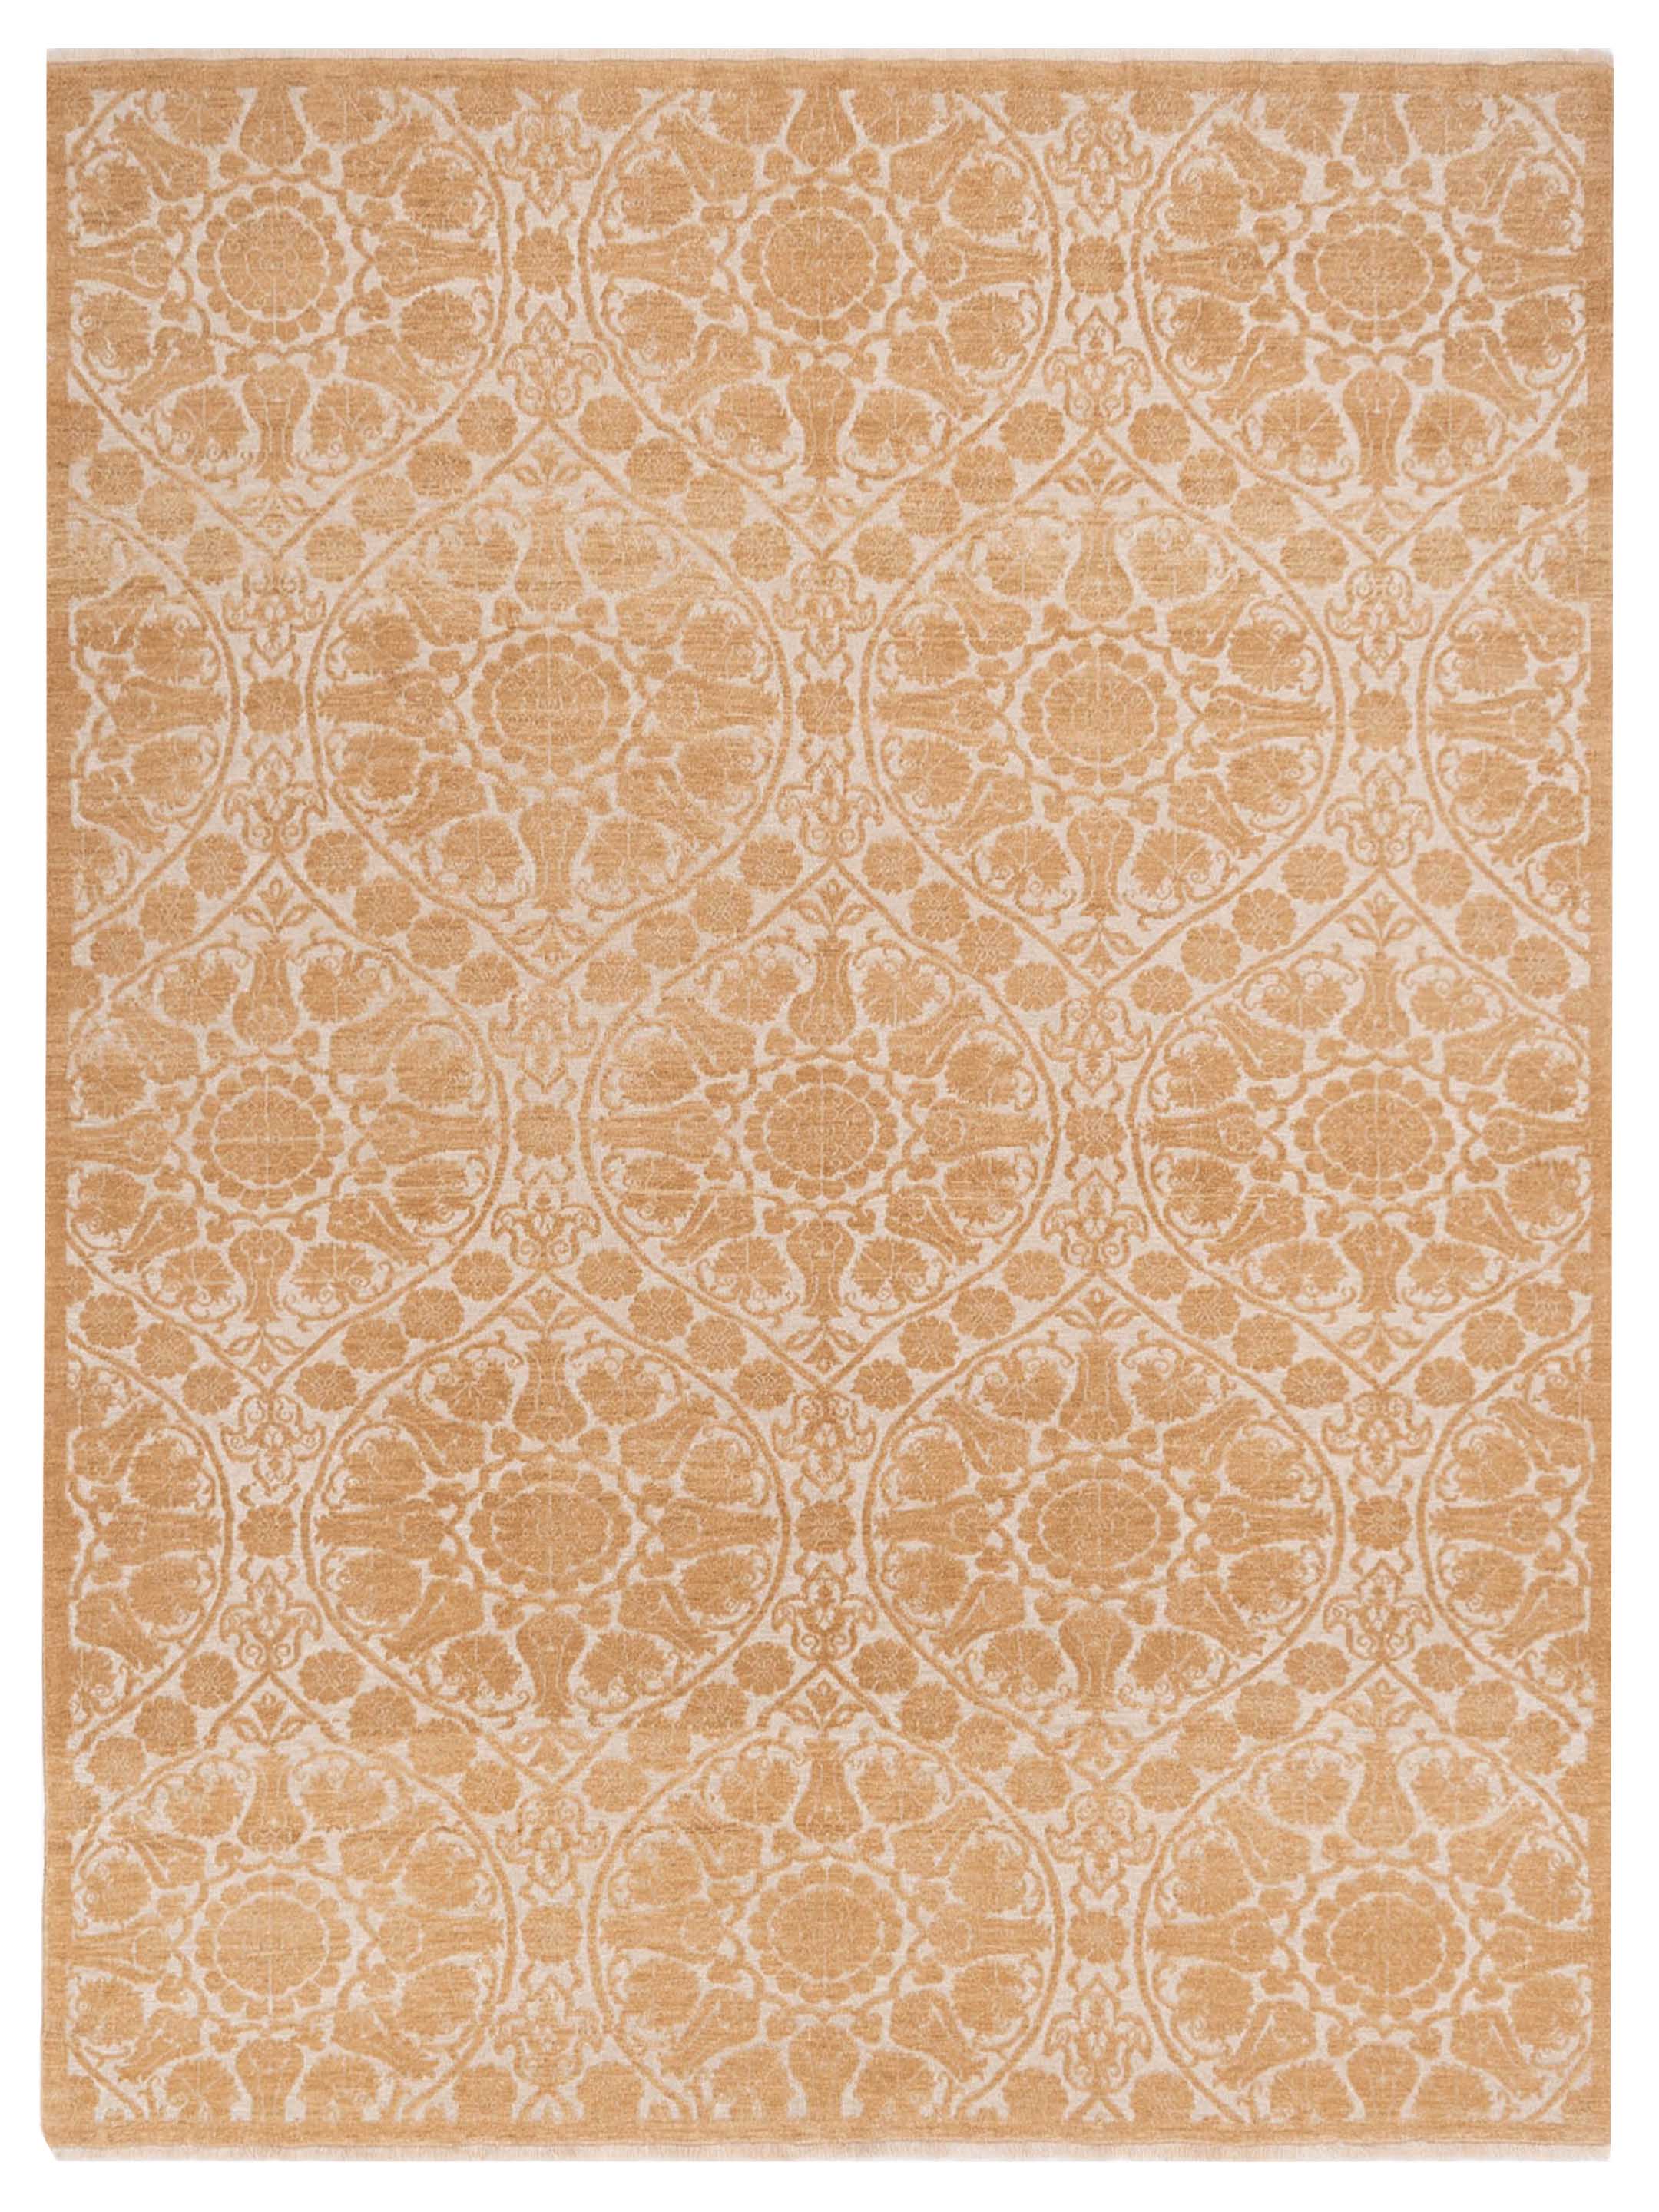 Transitional Ivory Area Rug	